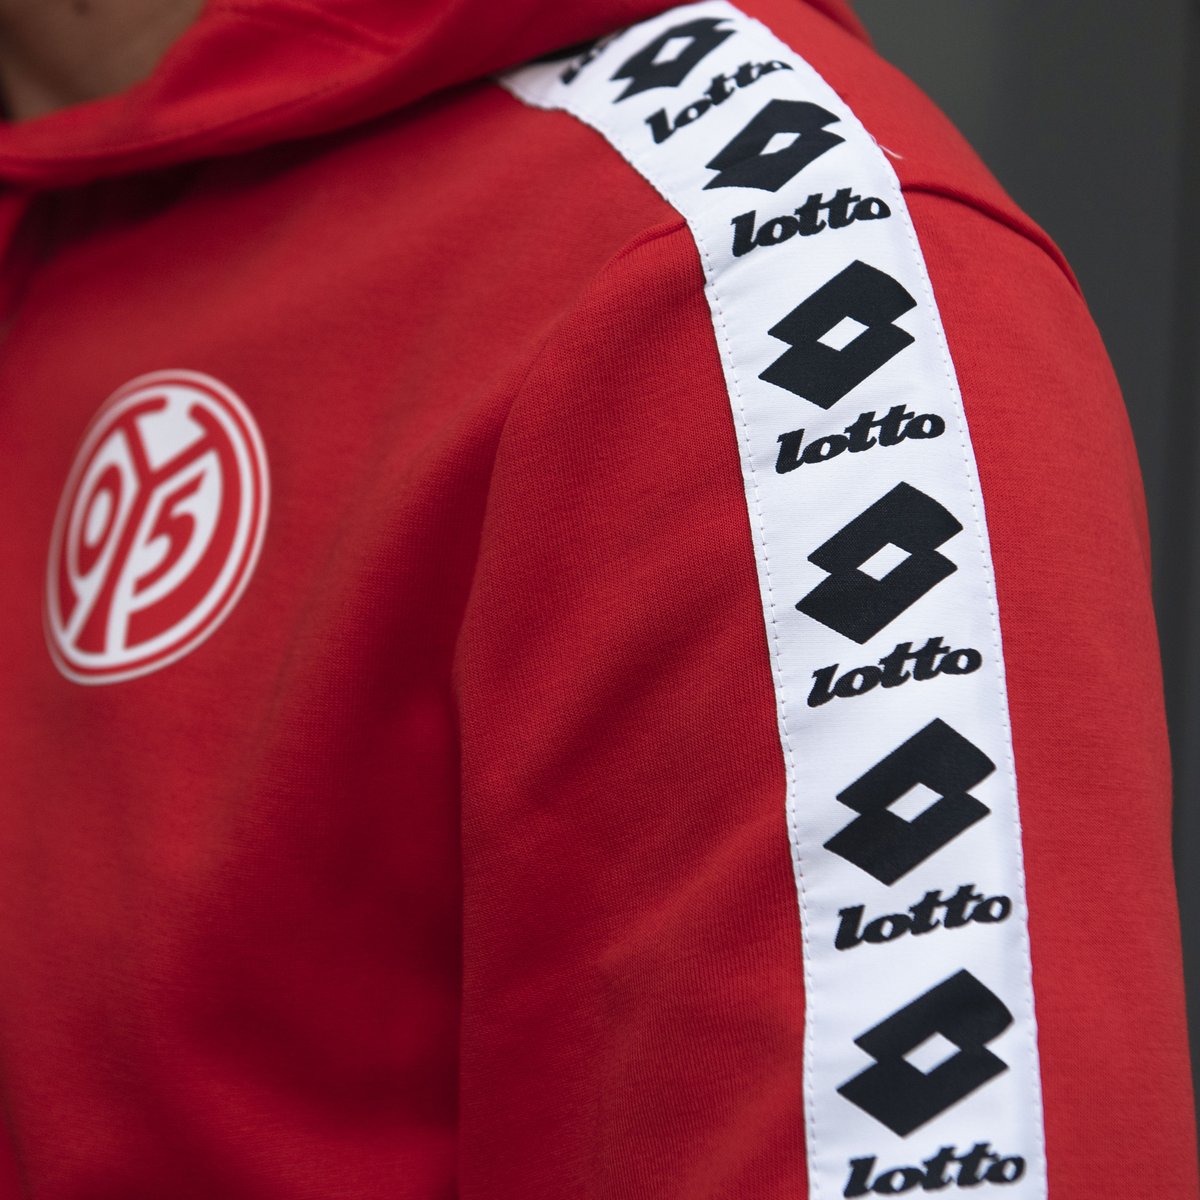 New In | FSV Mainz 2019/20 🇩🇪 We have a great selection of 2019/20 FSV Mainz Lotto products available on the site - including this excellent zip hoodie 🌍 Worldwide Shipping 🛒 Shop Here - ow.ly/a8yr50LgnuS